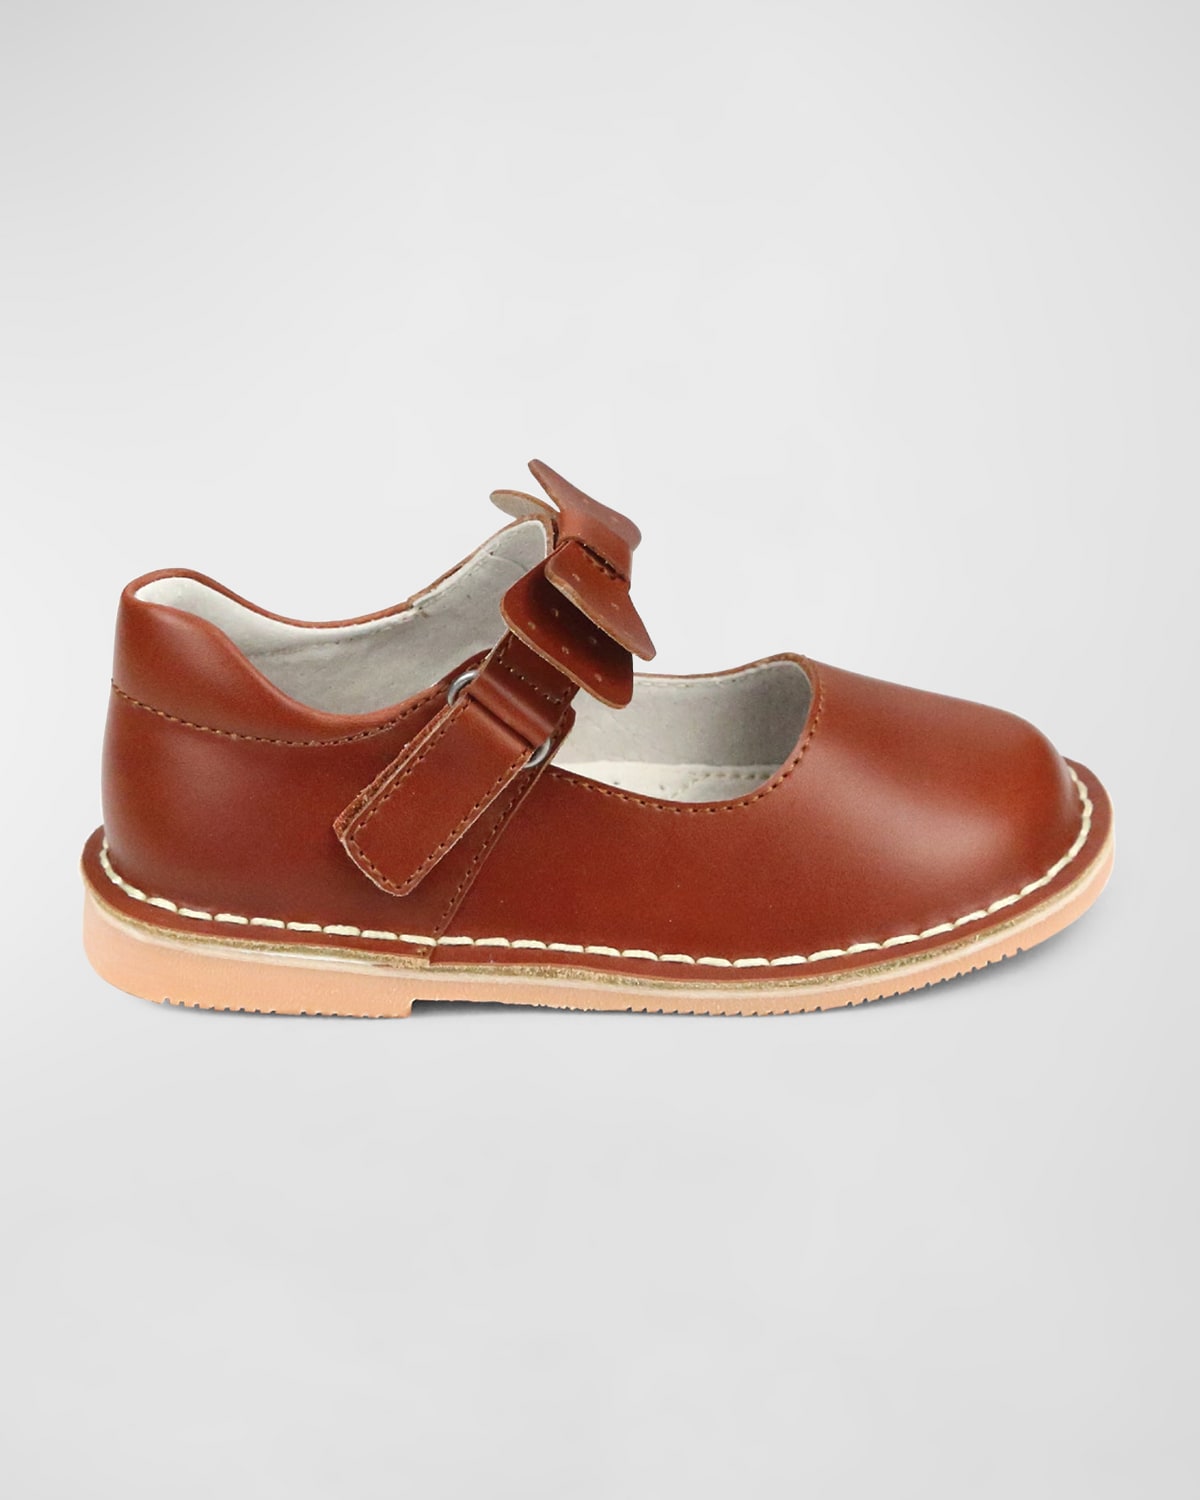 L'amour Shoes Girl's Iris Bow Mary Jane Shoes, Baby/toddler/kids In Cognac